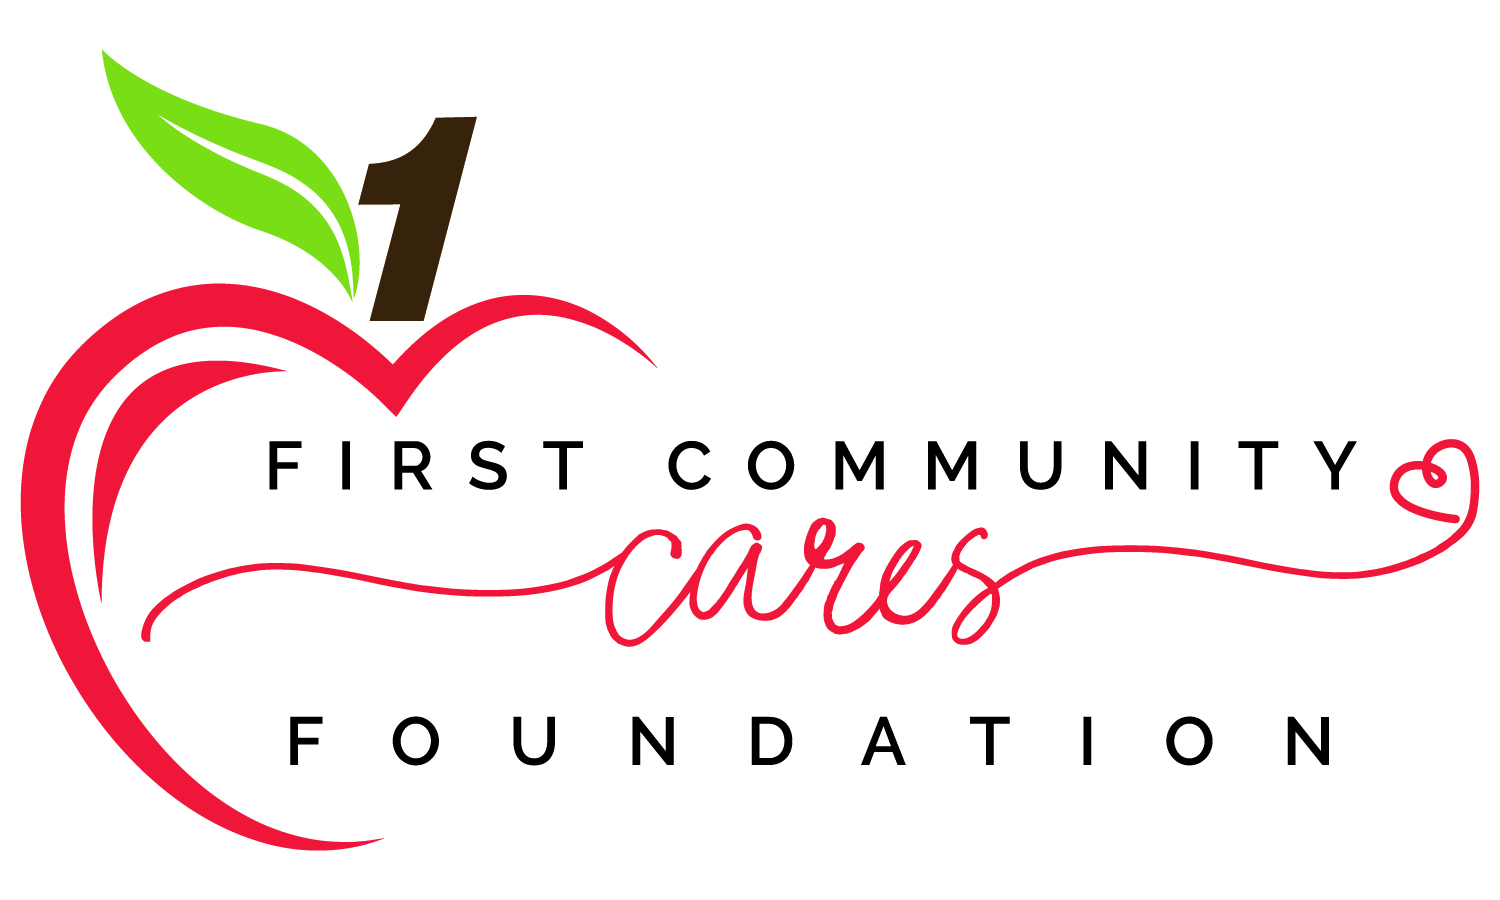 First Community Cares Foundation